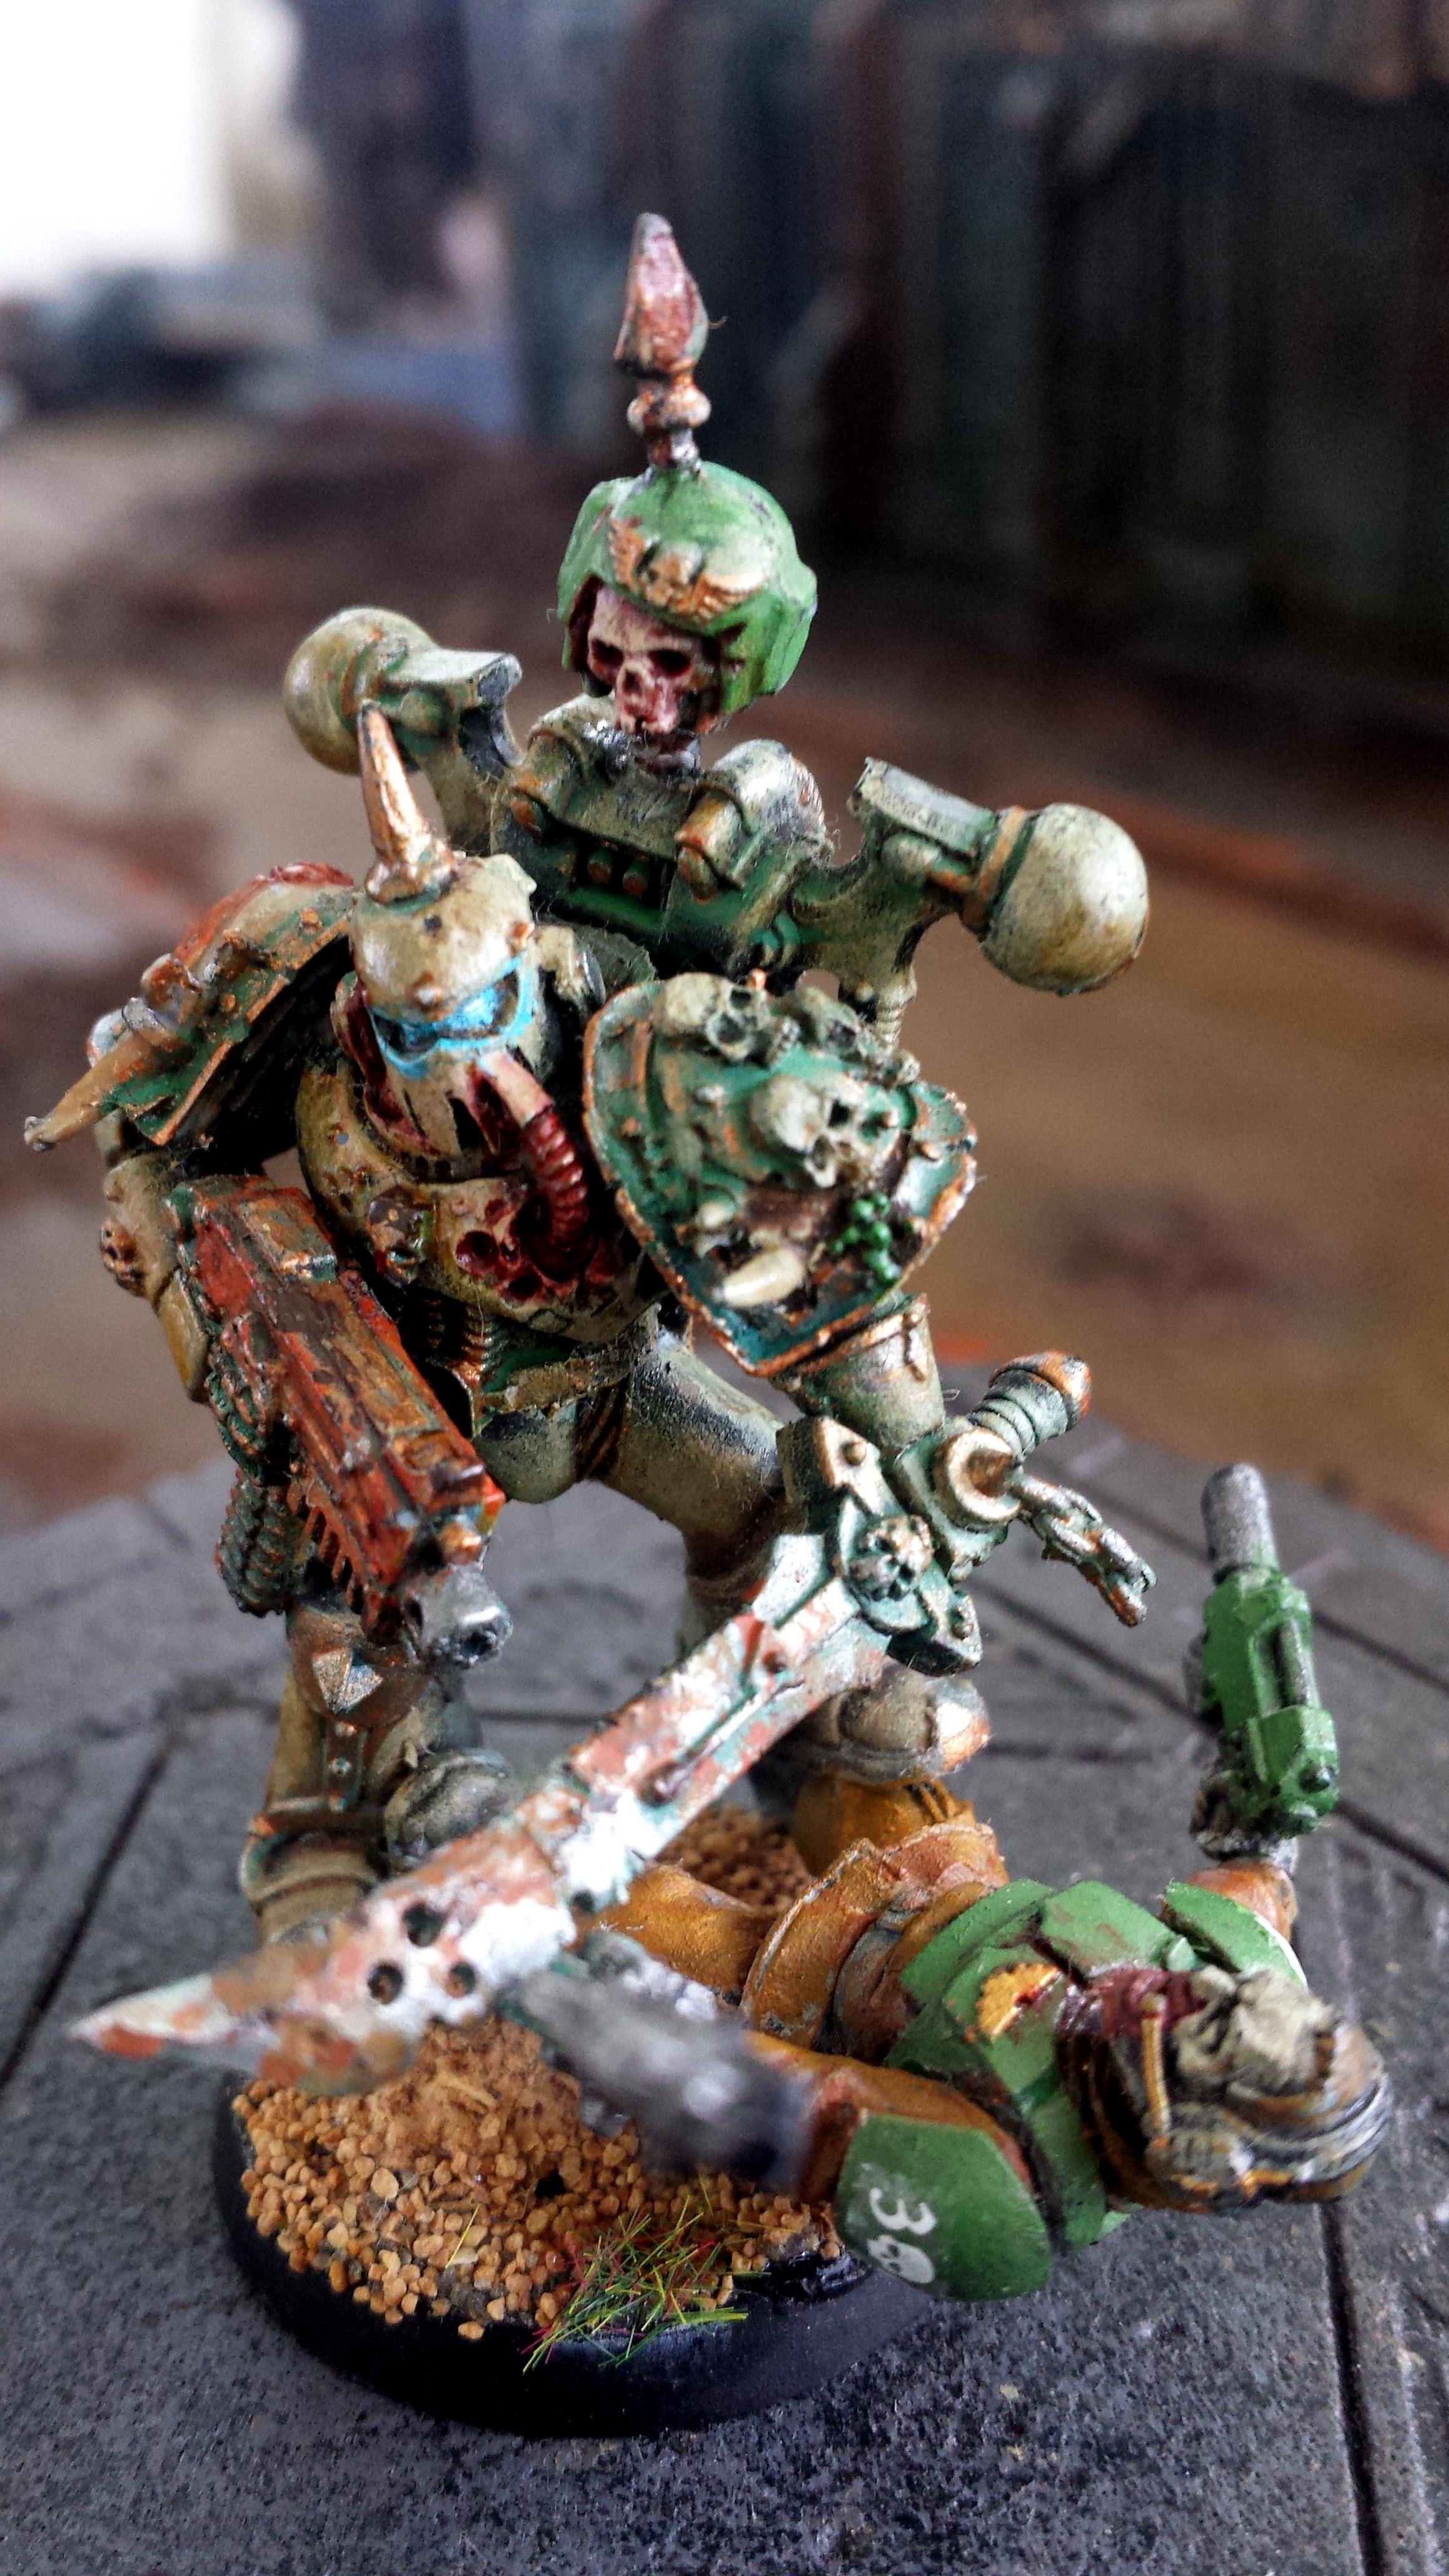 Apostles Of Contagion, Chaos, Forge World, Nurgle, Plague Marines, Warhammer 40,000